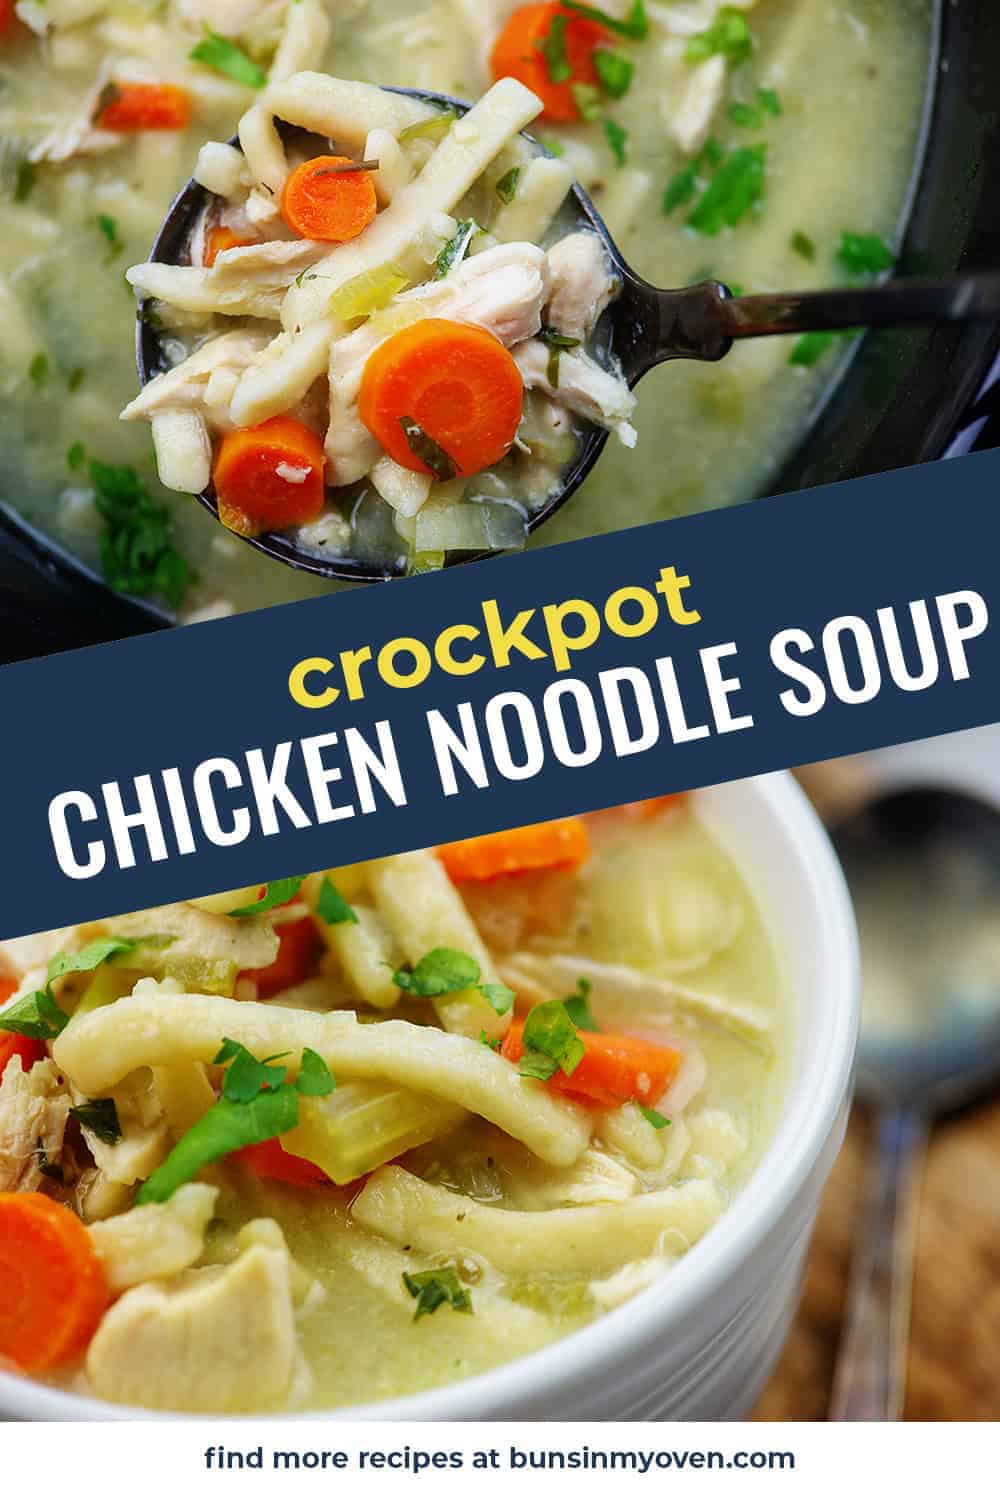 chicken noodle soup photo collage for pinterest